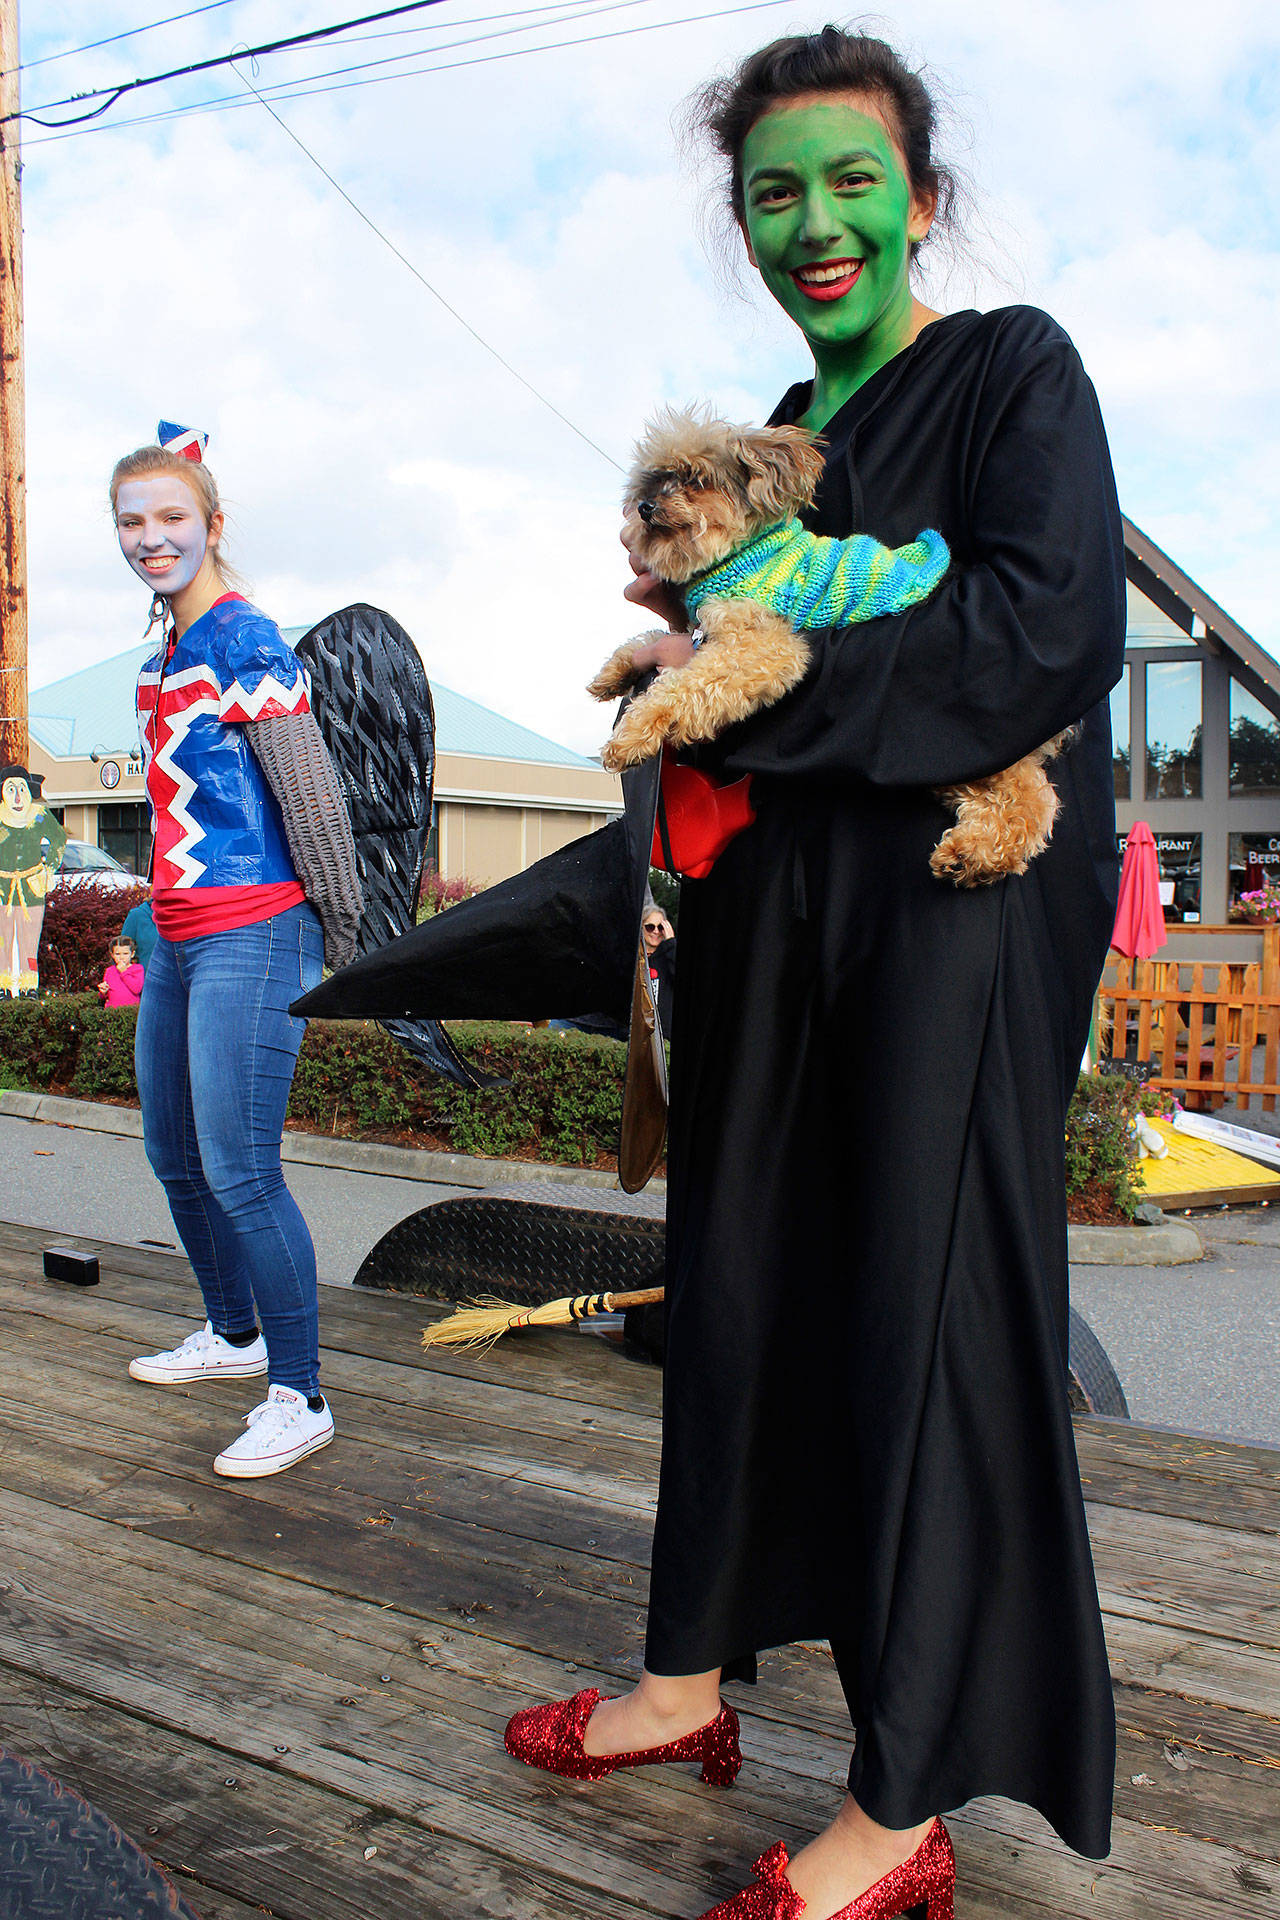 And Toto too: Coupeville High School celebrates Homecoming 2017 with an afternoon parade down South Main Street Friday. Sports teams, cheerleaders, bands and clubs joined characters from the Wizard of Oz, the decorating theme for “The Haunting of Coupeville.” Photo by Patricia Guthrie/Whidbey News-Times